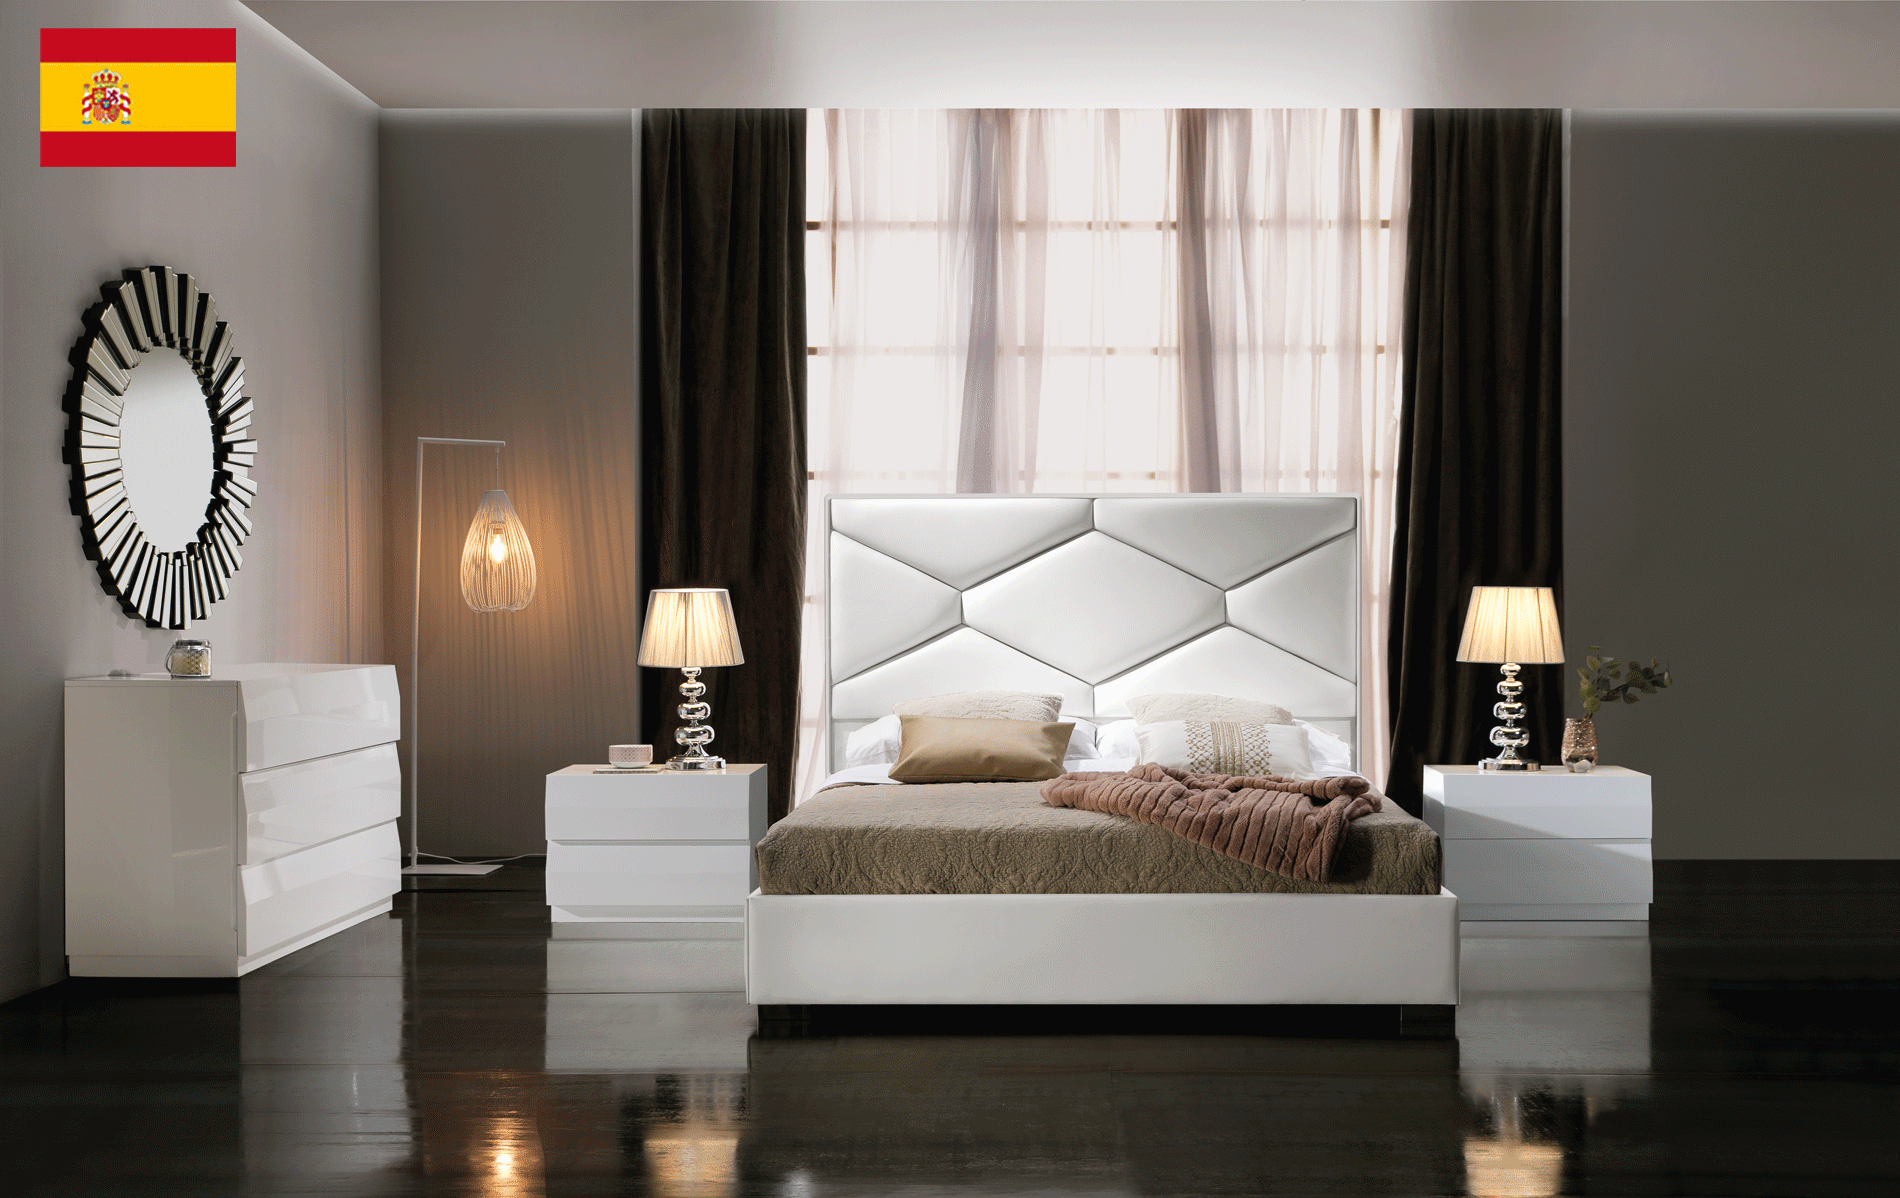 Bedroom Furniture Beds with storage Martina LUX Bedroom Storage White, M152, C152, E100